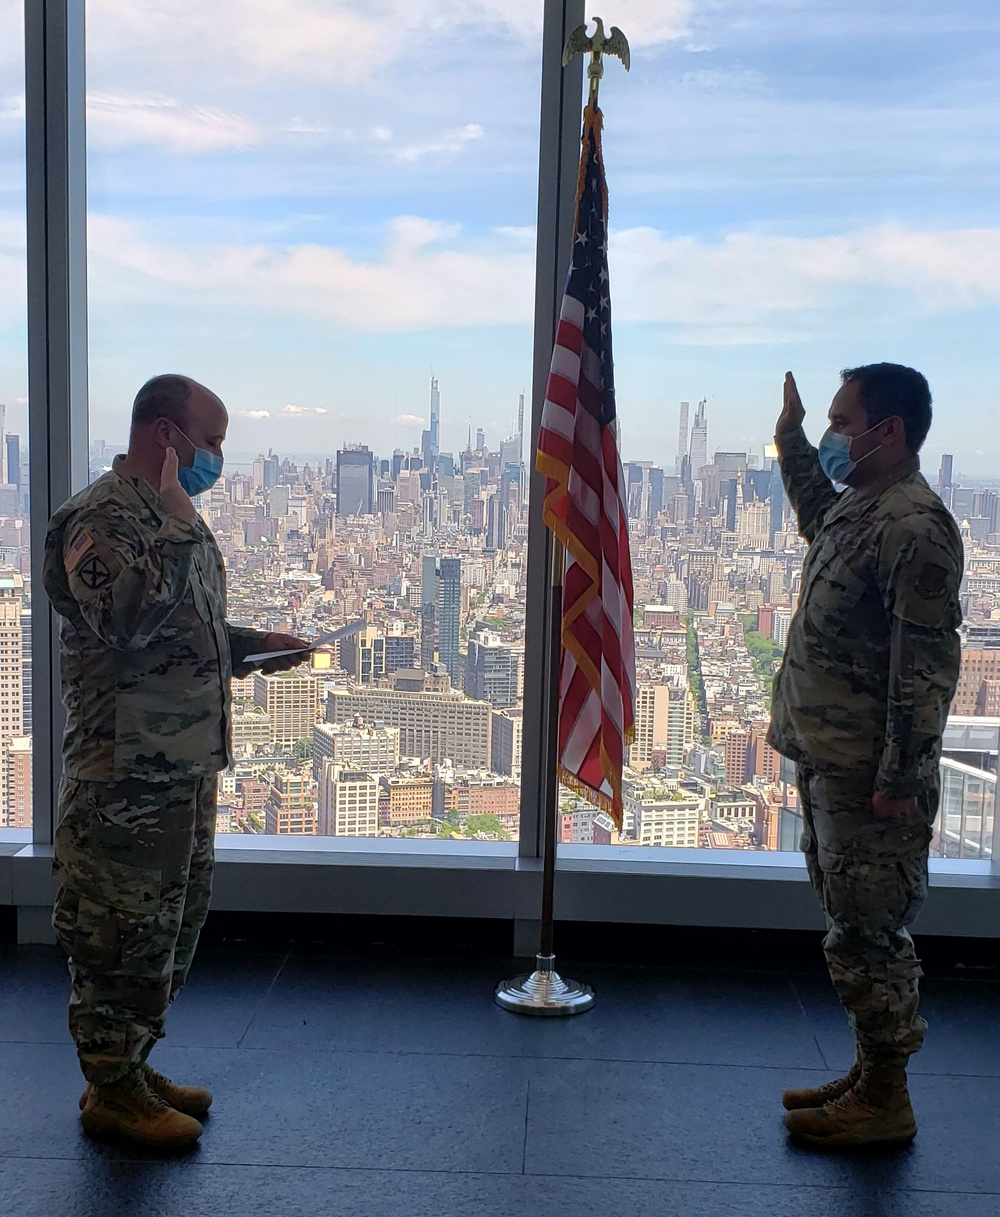 Promotion Recognizes Guardsmen During Pandemic Response in NYC